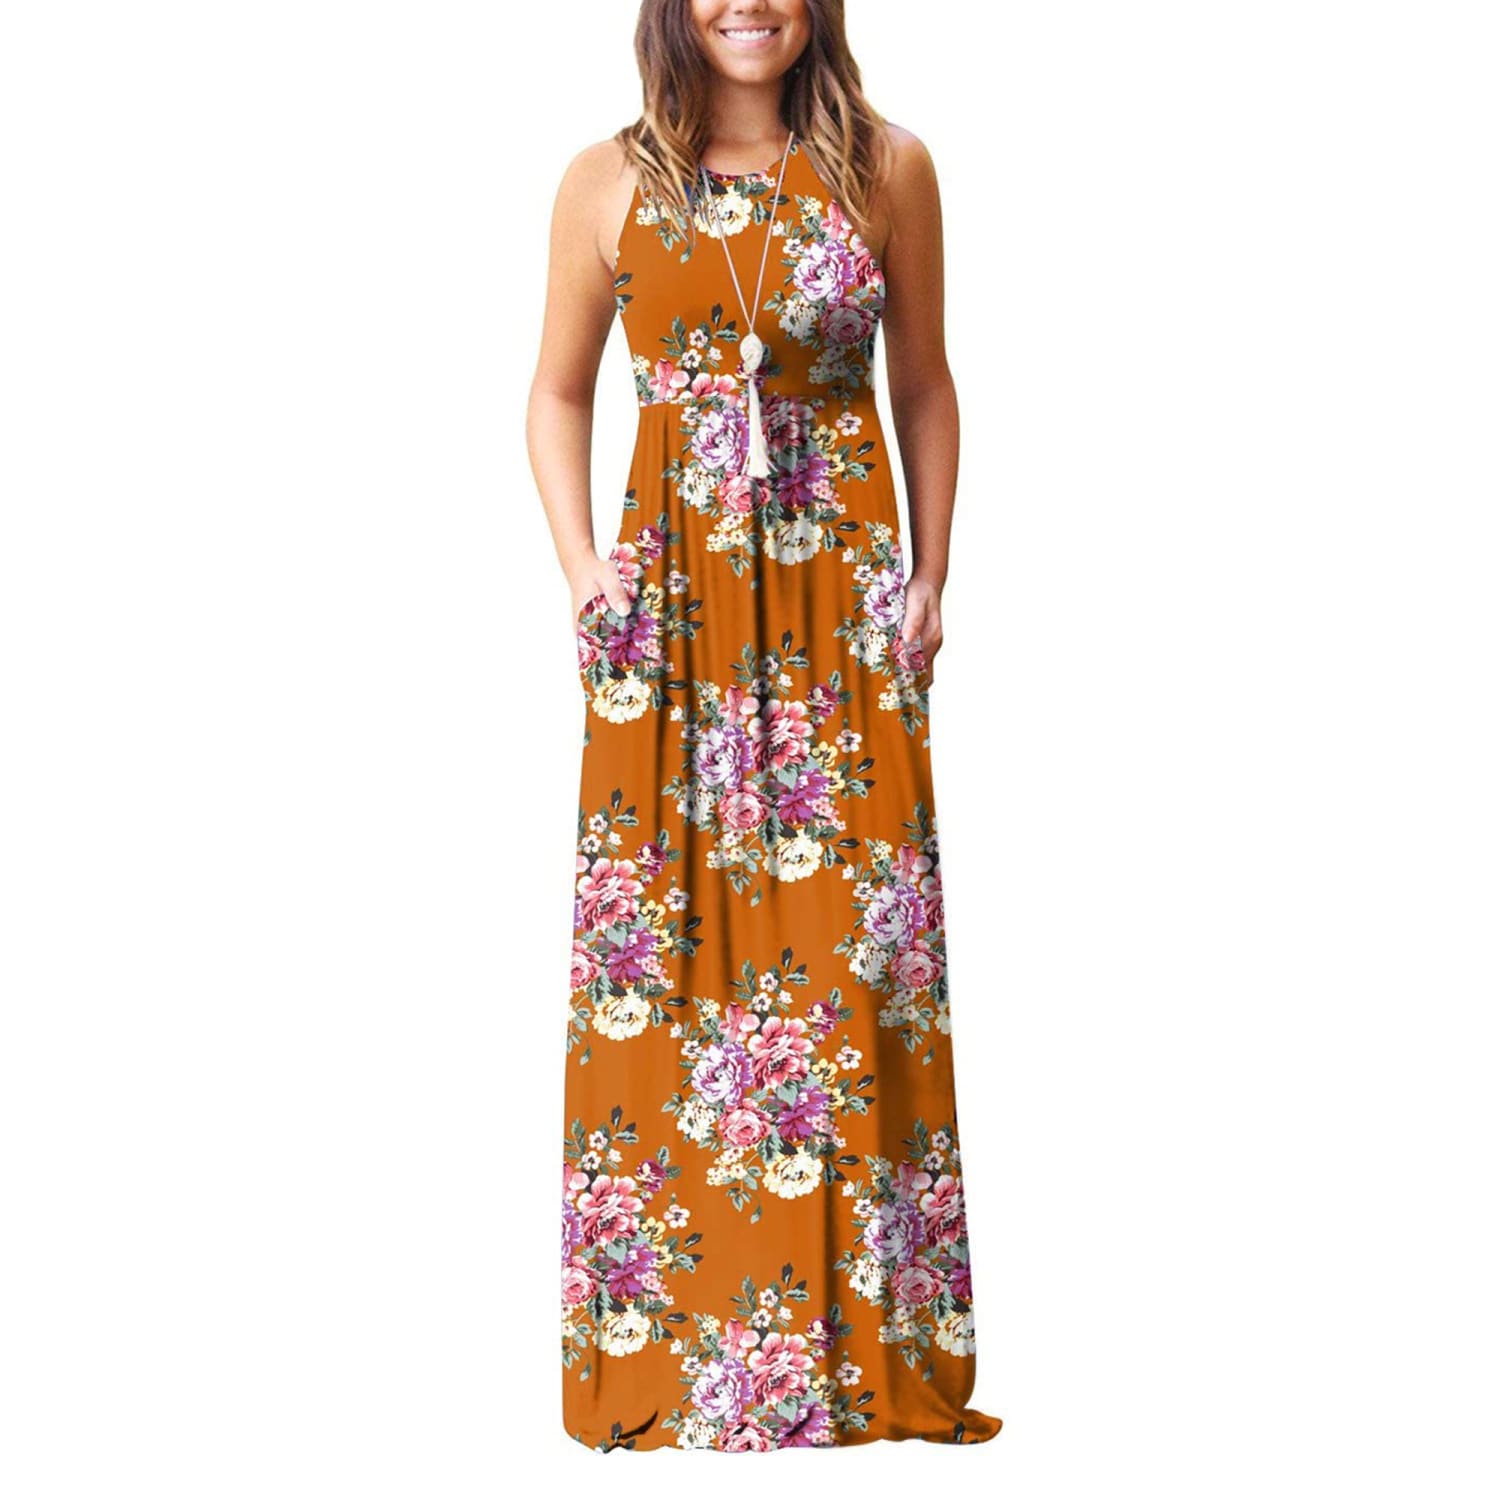 My new go-to maxi dress from Amazon is ...